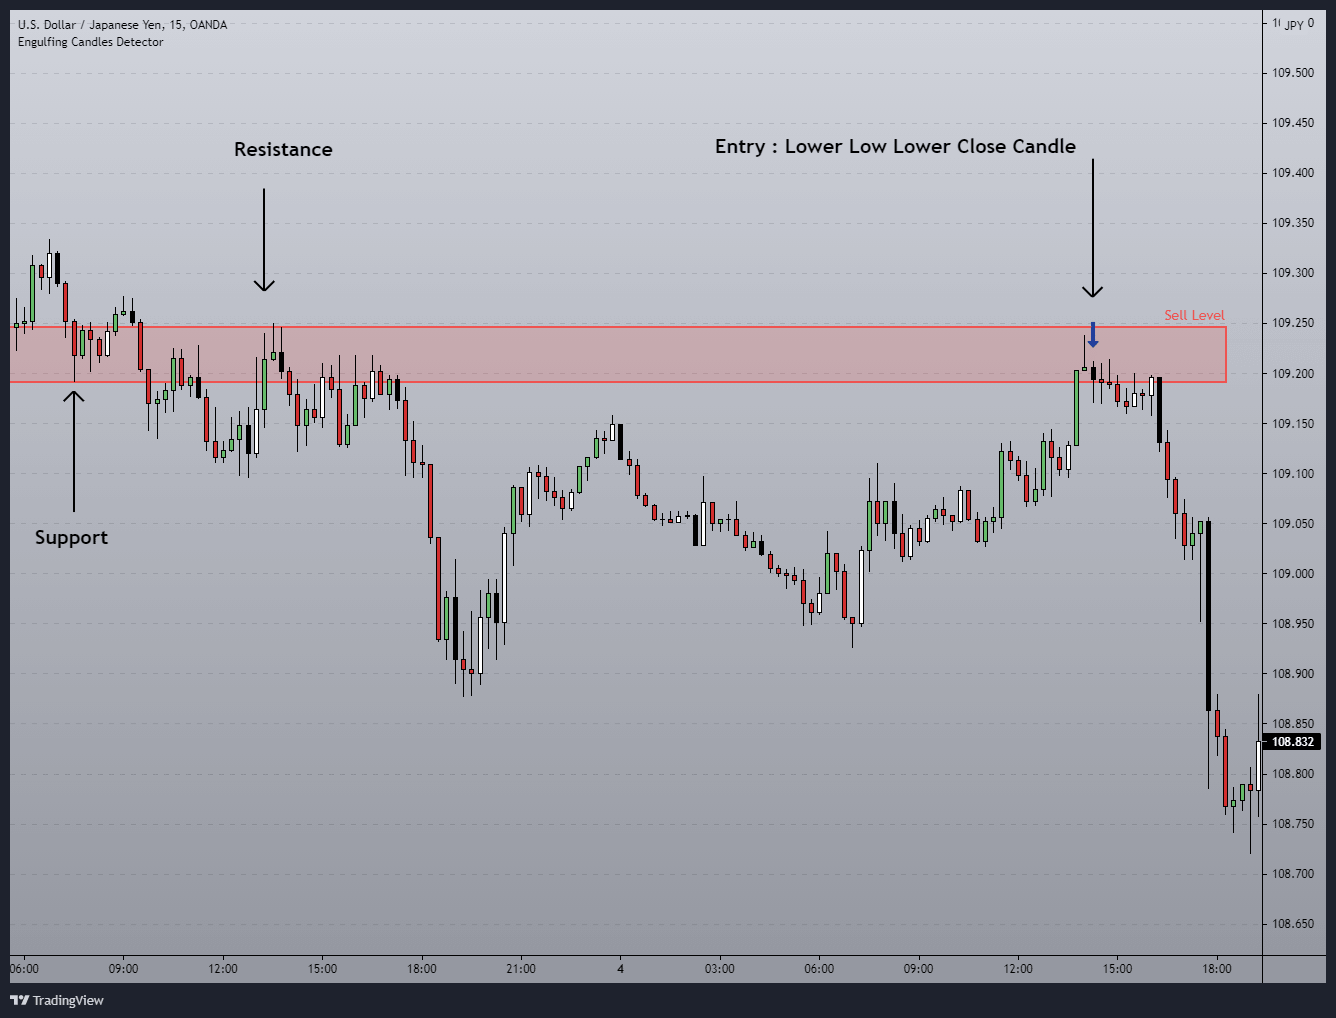 Trade entry one - rejection signal at the resistance